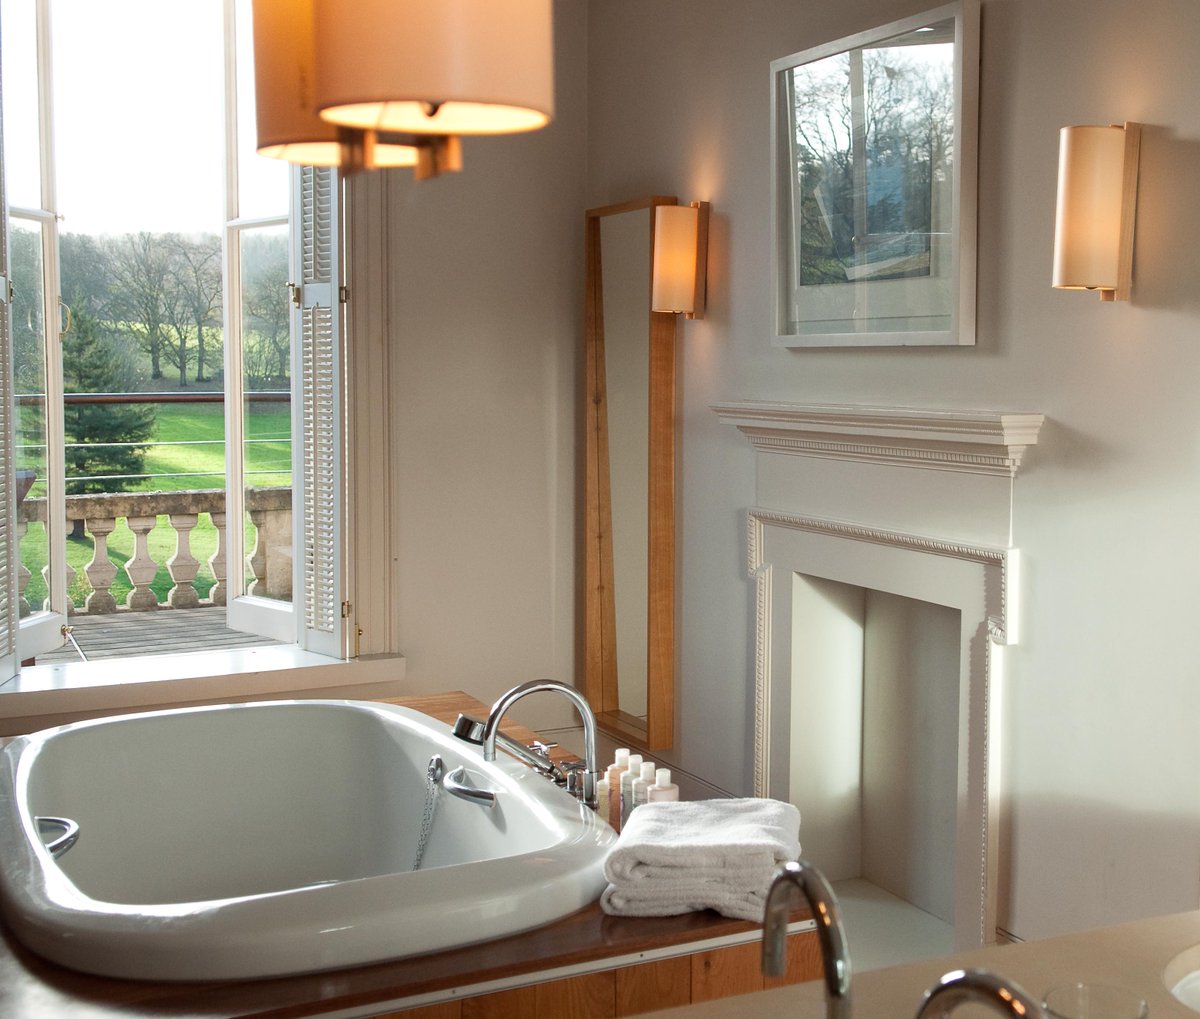 Enjoy a soak with someone special in your very own oversized bathtub - perfect for a romantic retreat. Explore our rooms and find the perfect place to spend some time away via our website: cowleymanor.com #spoilyourself #luxuryhotels #ukhotels #ukbreak #shortbreaks